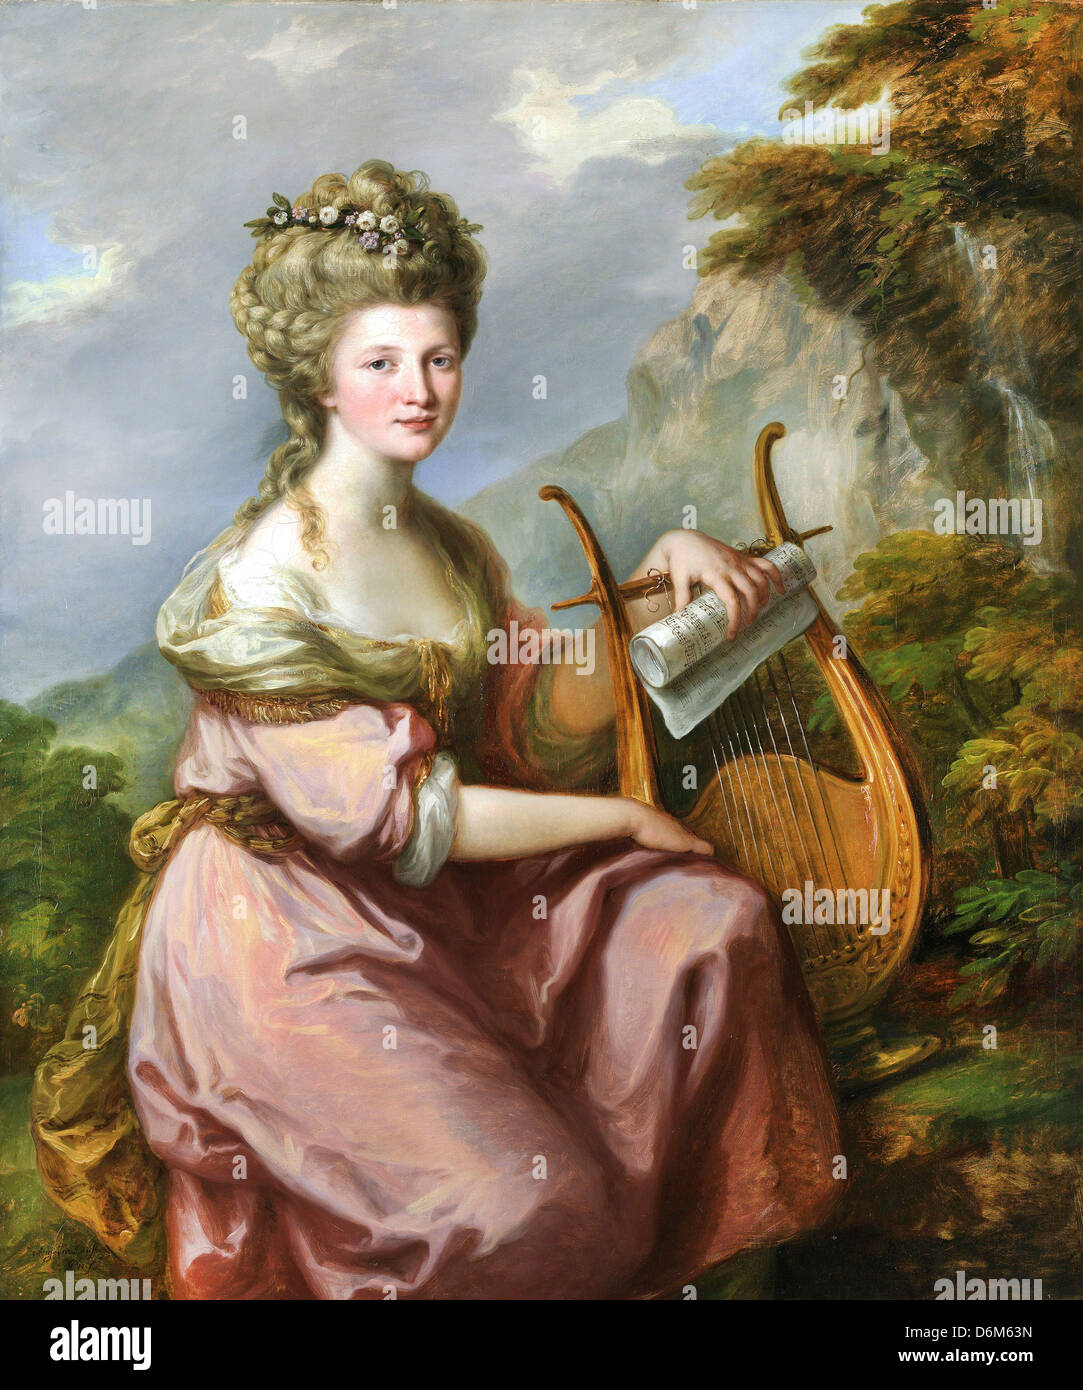 Angelica Kauffman, Portrait of Sarah Harrop (Mrs. Bates) as a Muse 1780 - 1781 Oil on canvas. Stock Photo